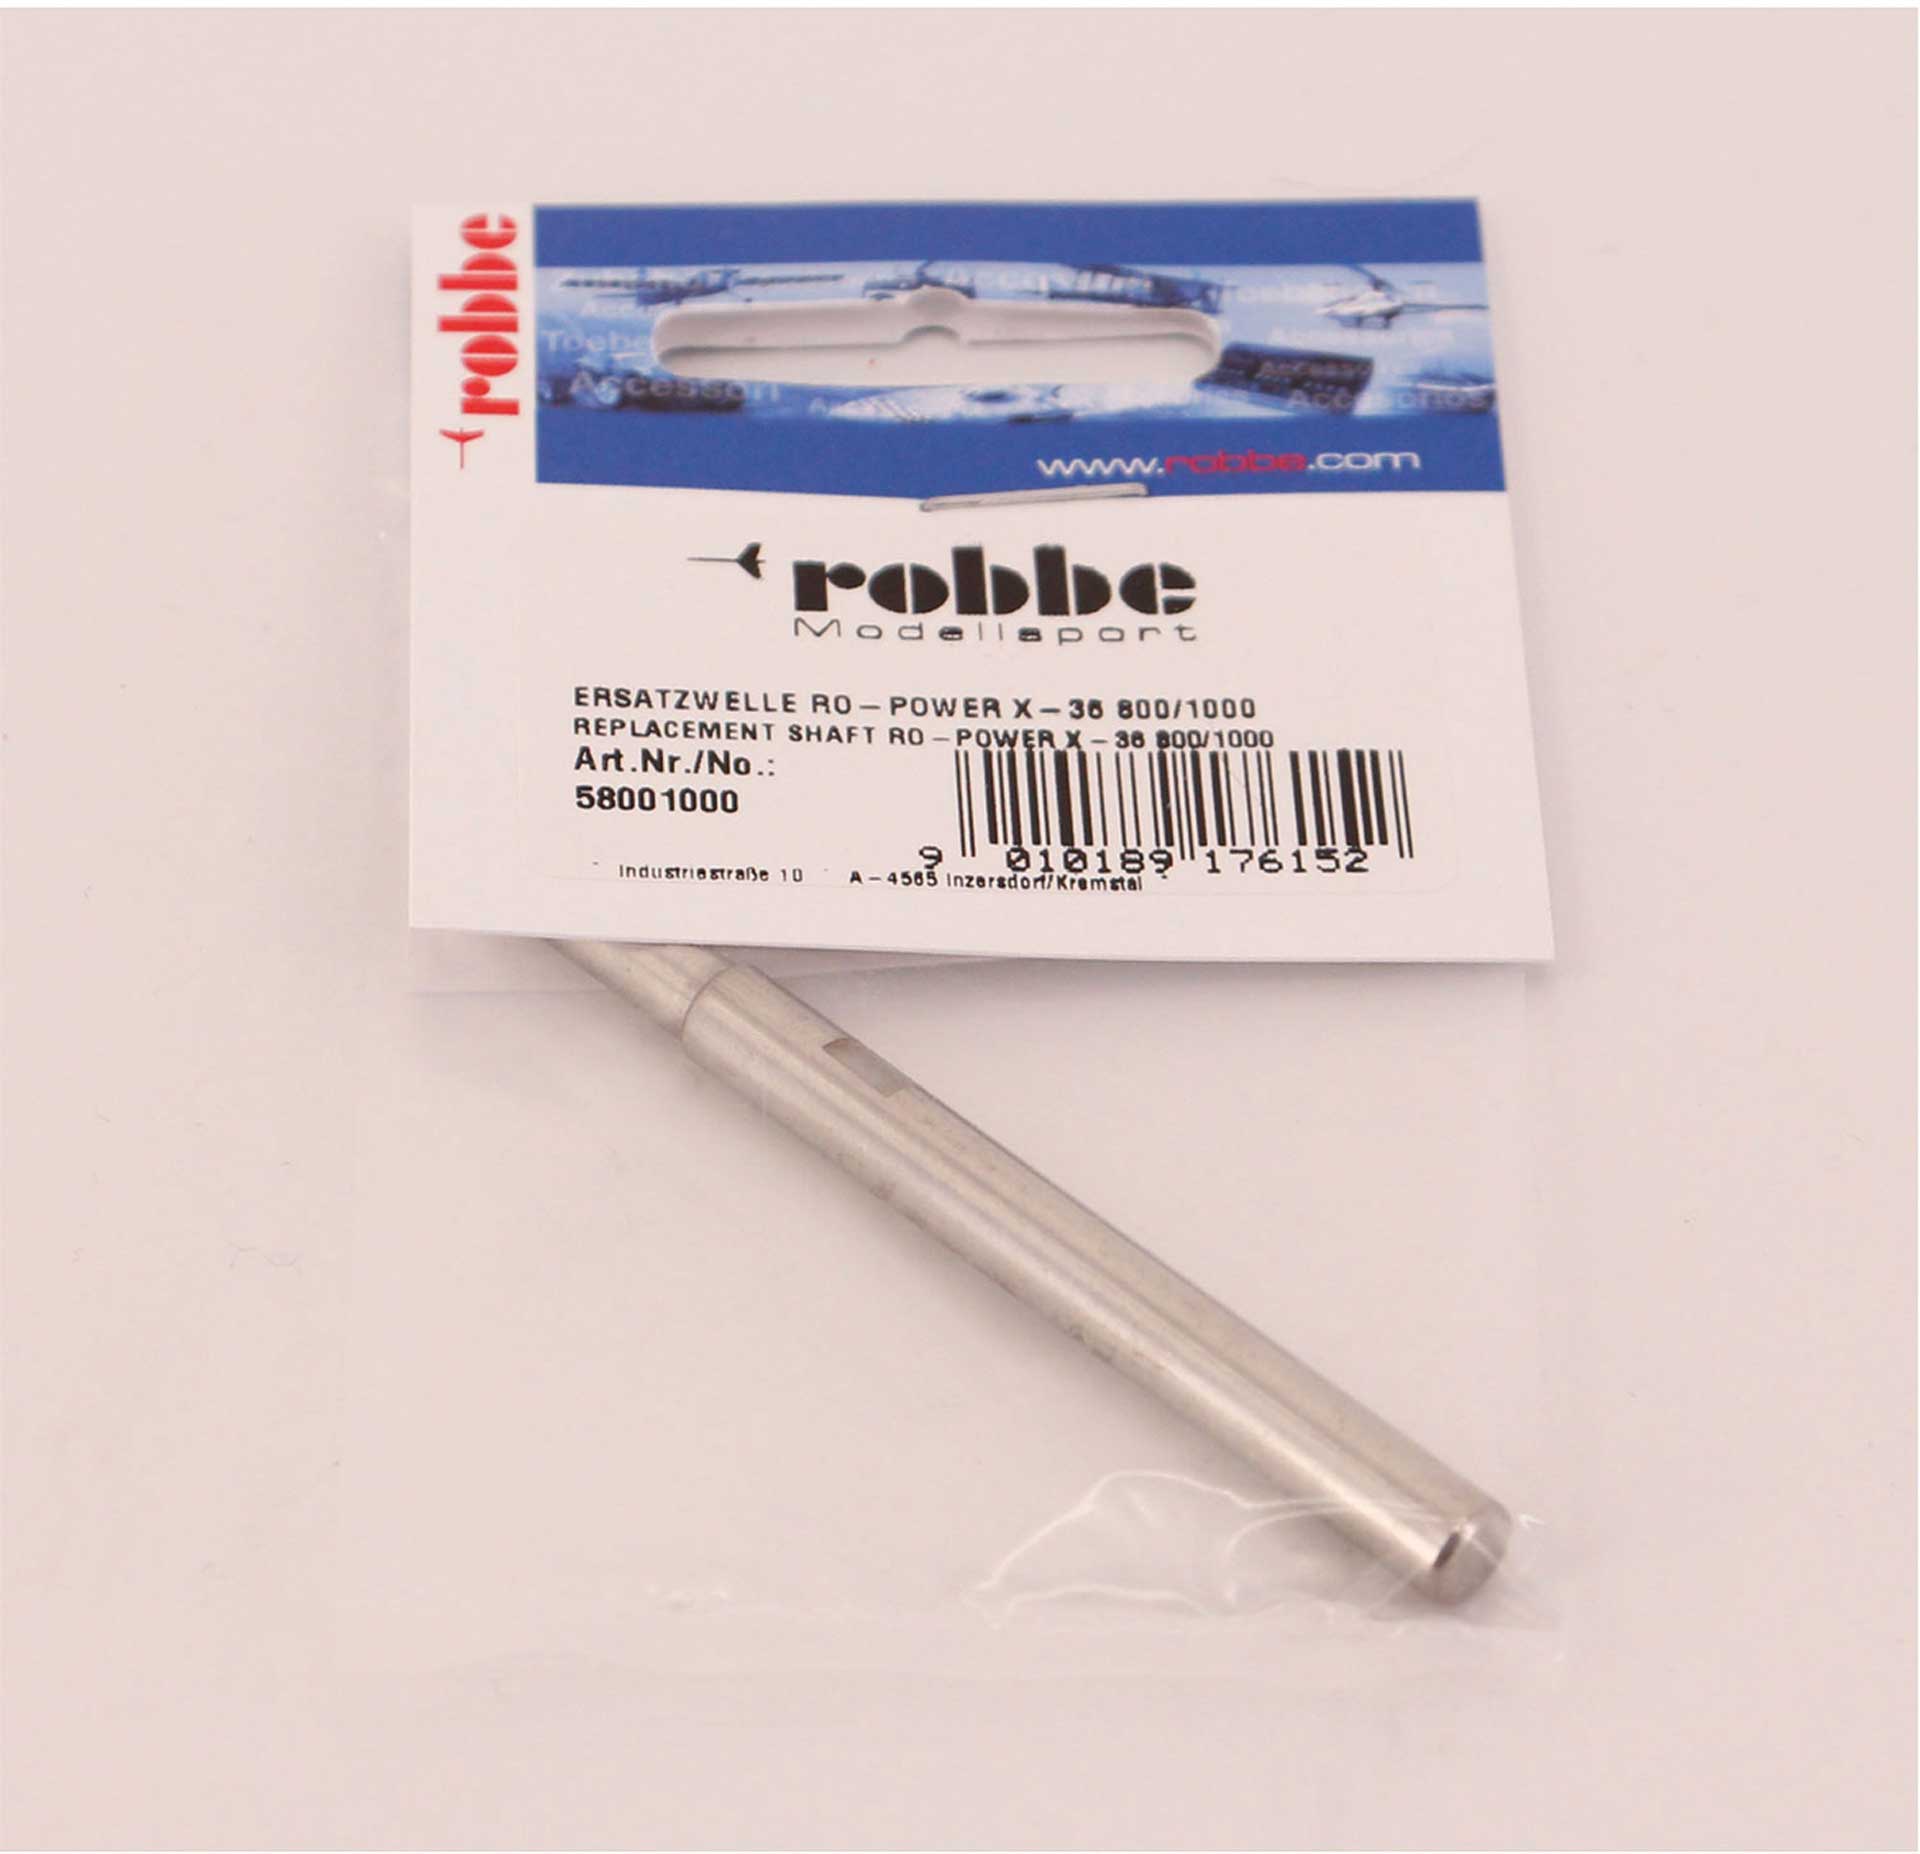 Robbe Modellsport REPLACEMENT SHAFT RO-POWER X-36 800/1000